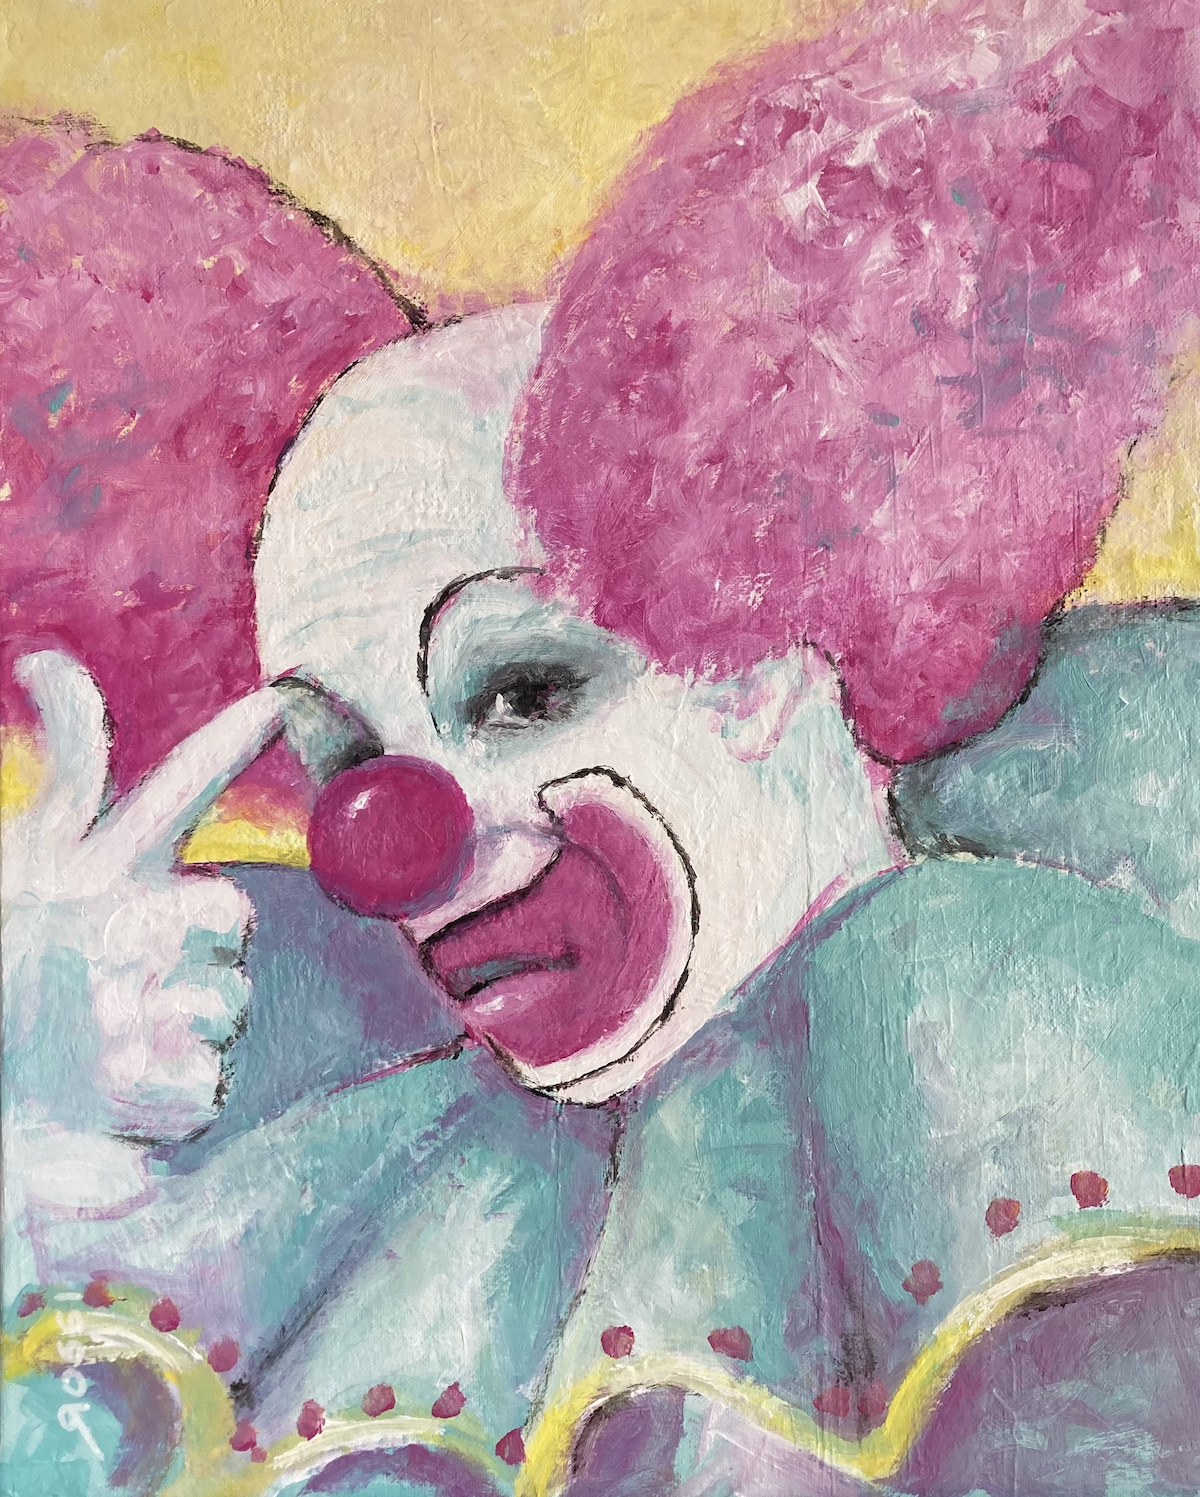 Cotton Candy Clown: What's the Point. by M. Rossi